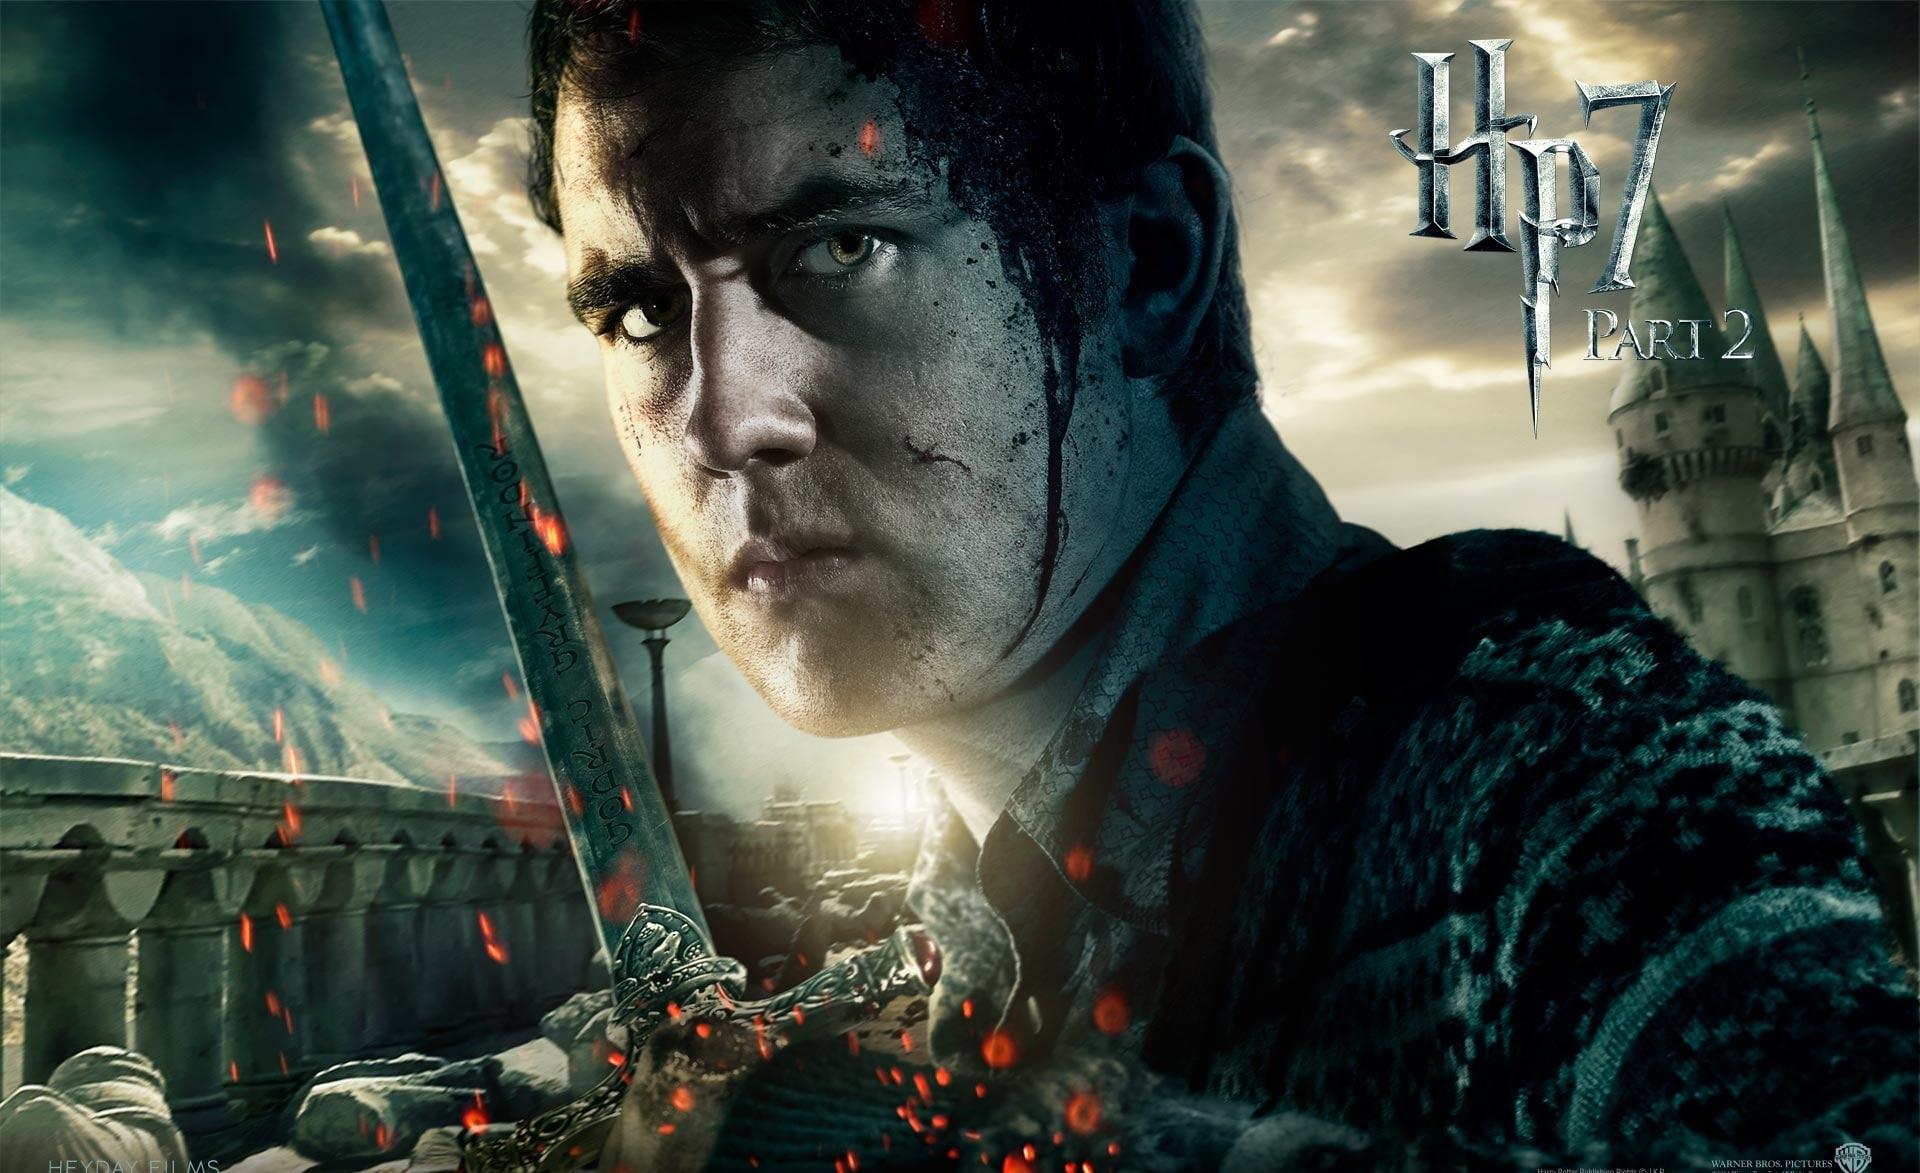 Harry Potter And The Deathly Hallows Part 2..., Harry Potter 7 Part 2 wallpaper